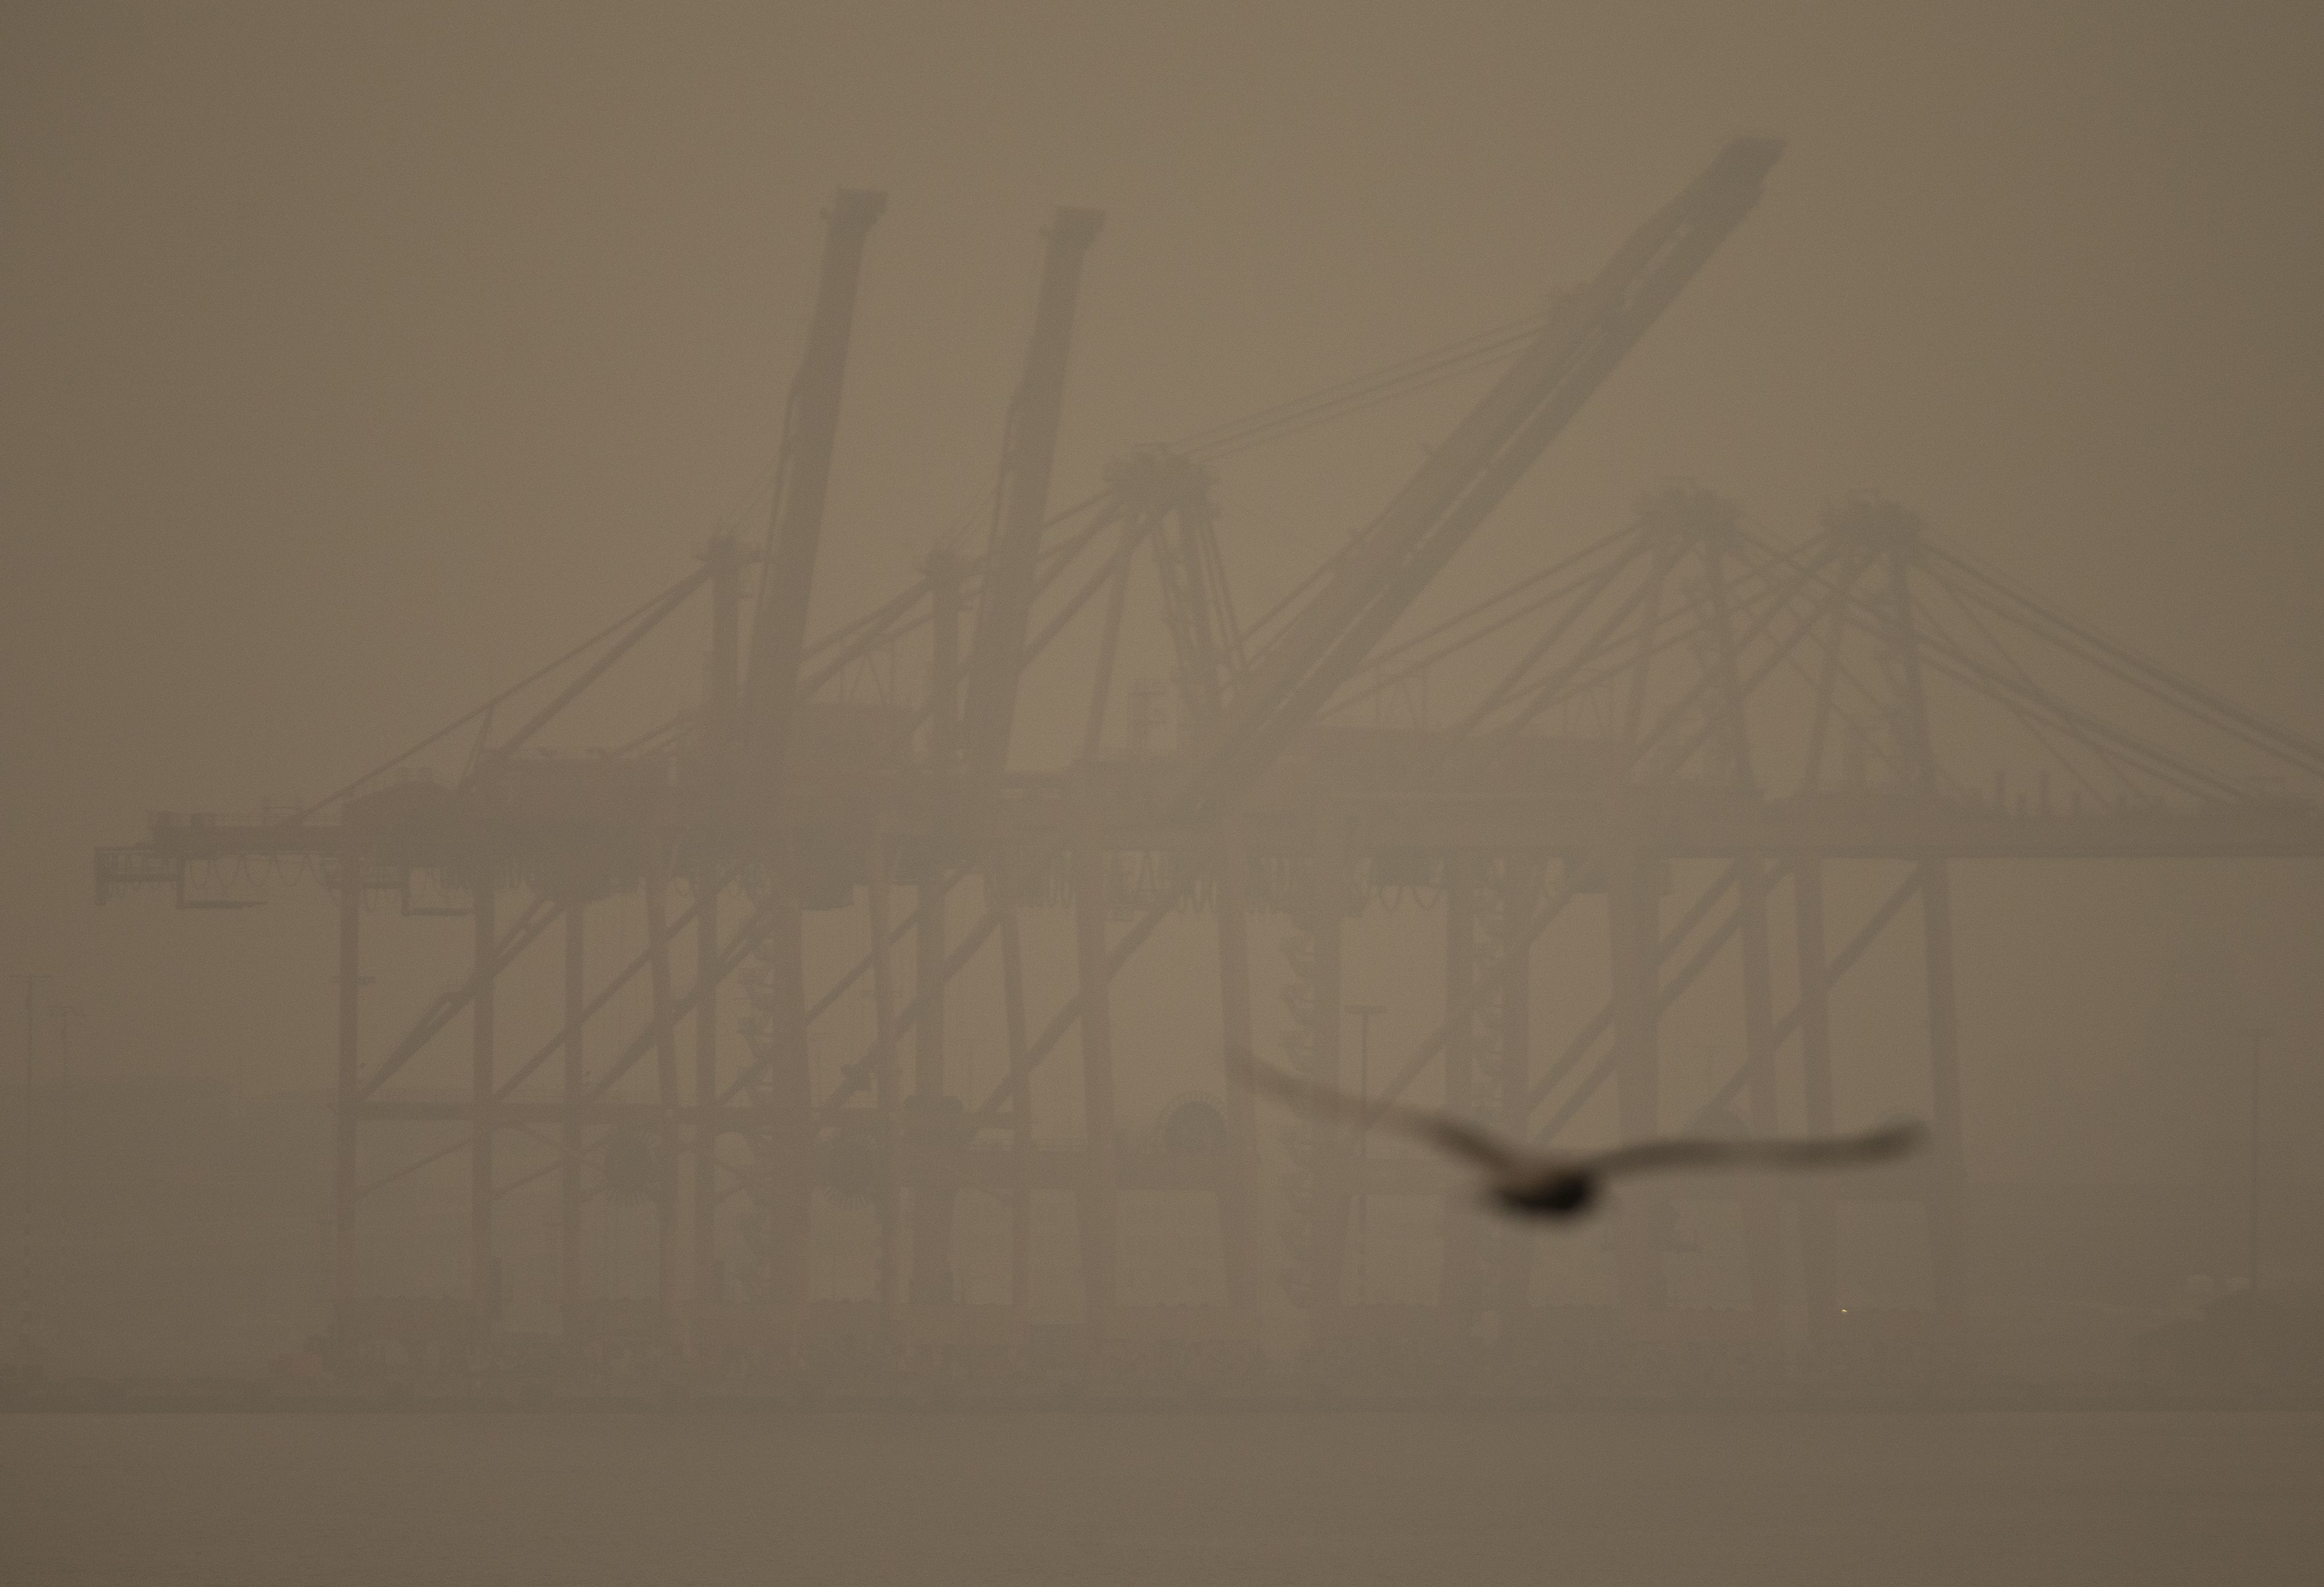  A seagull flies past cranes on Harbor Island as smoke from wildfires fills the air on September 12